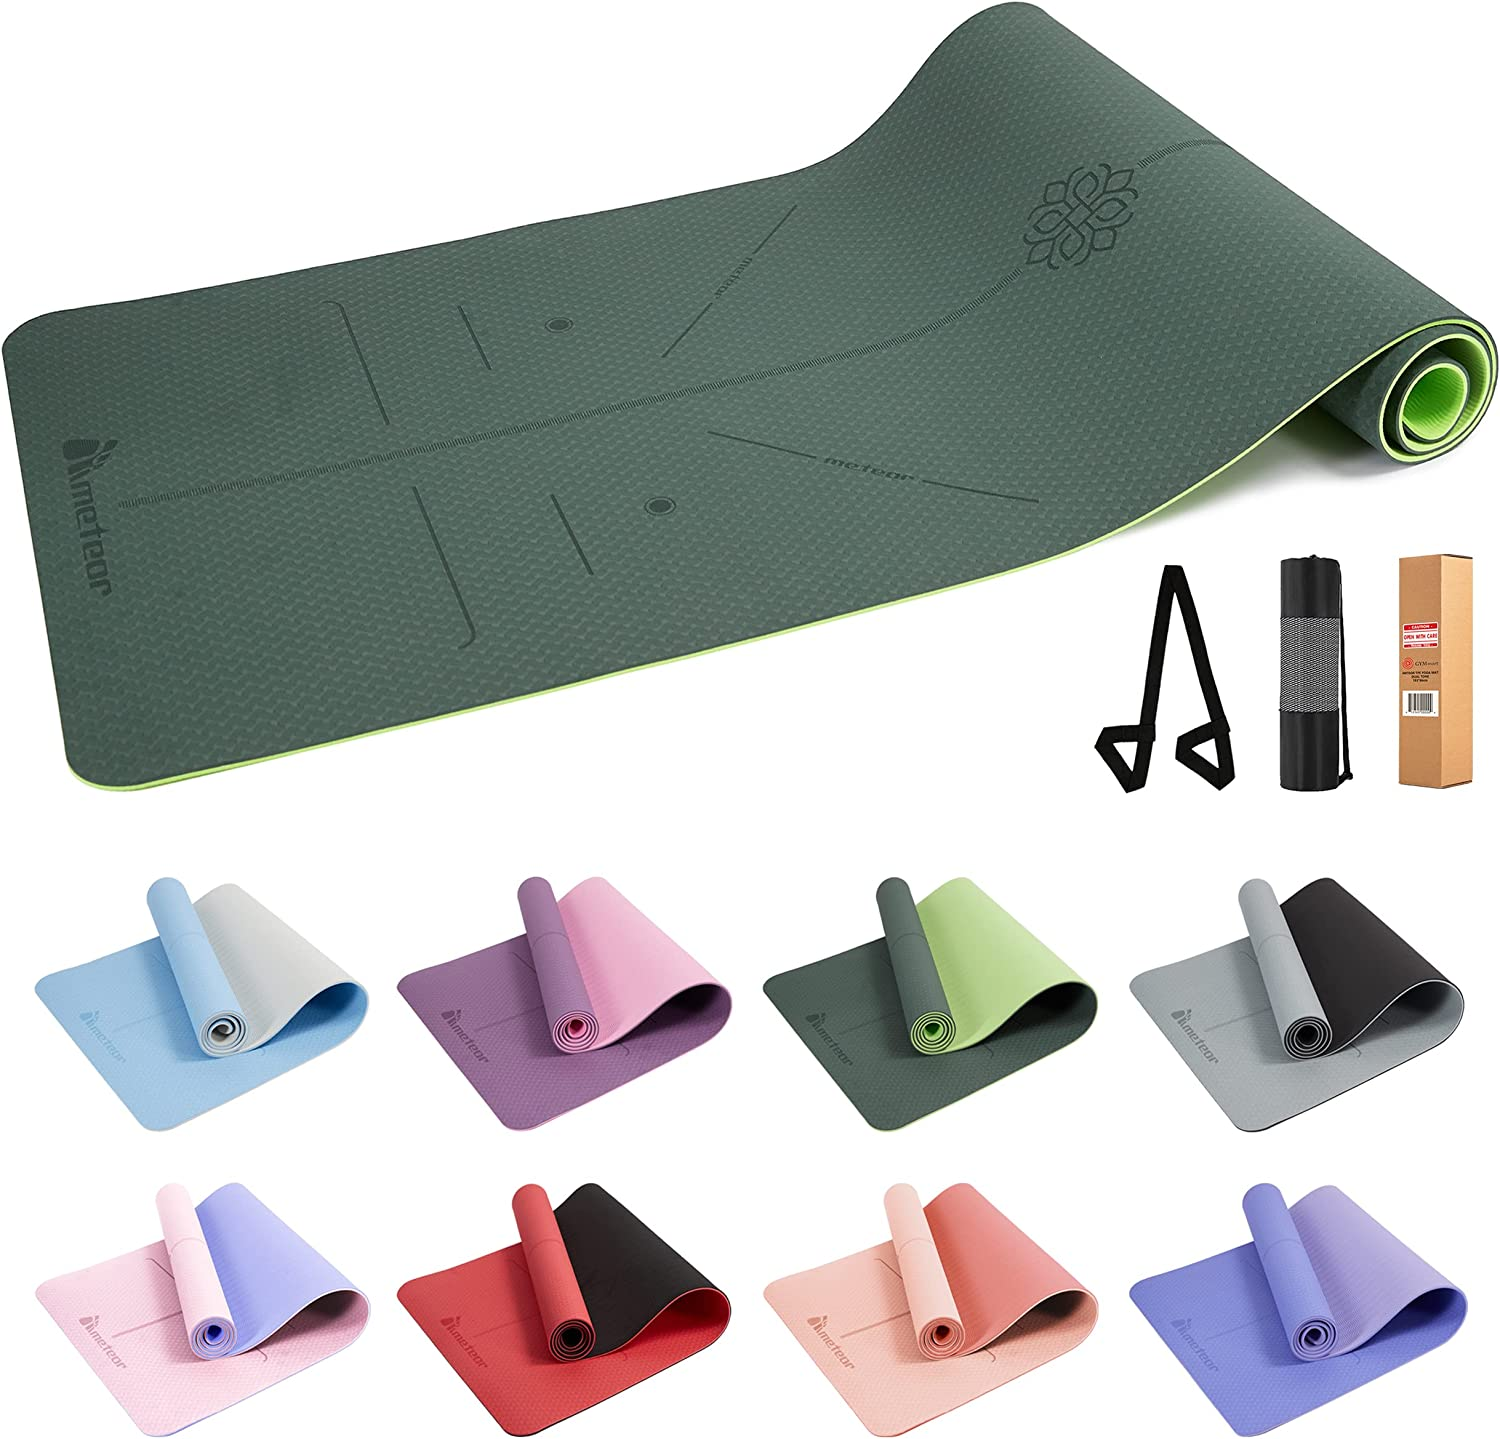 Primasole Folding Yoga Travel Pilates Mat 1/4 Thick. Easy to Carry for  Yoga, Pilates Fintess, Workout.